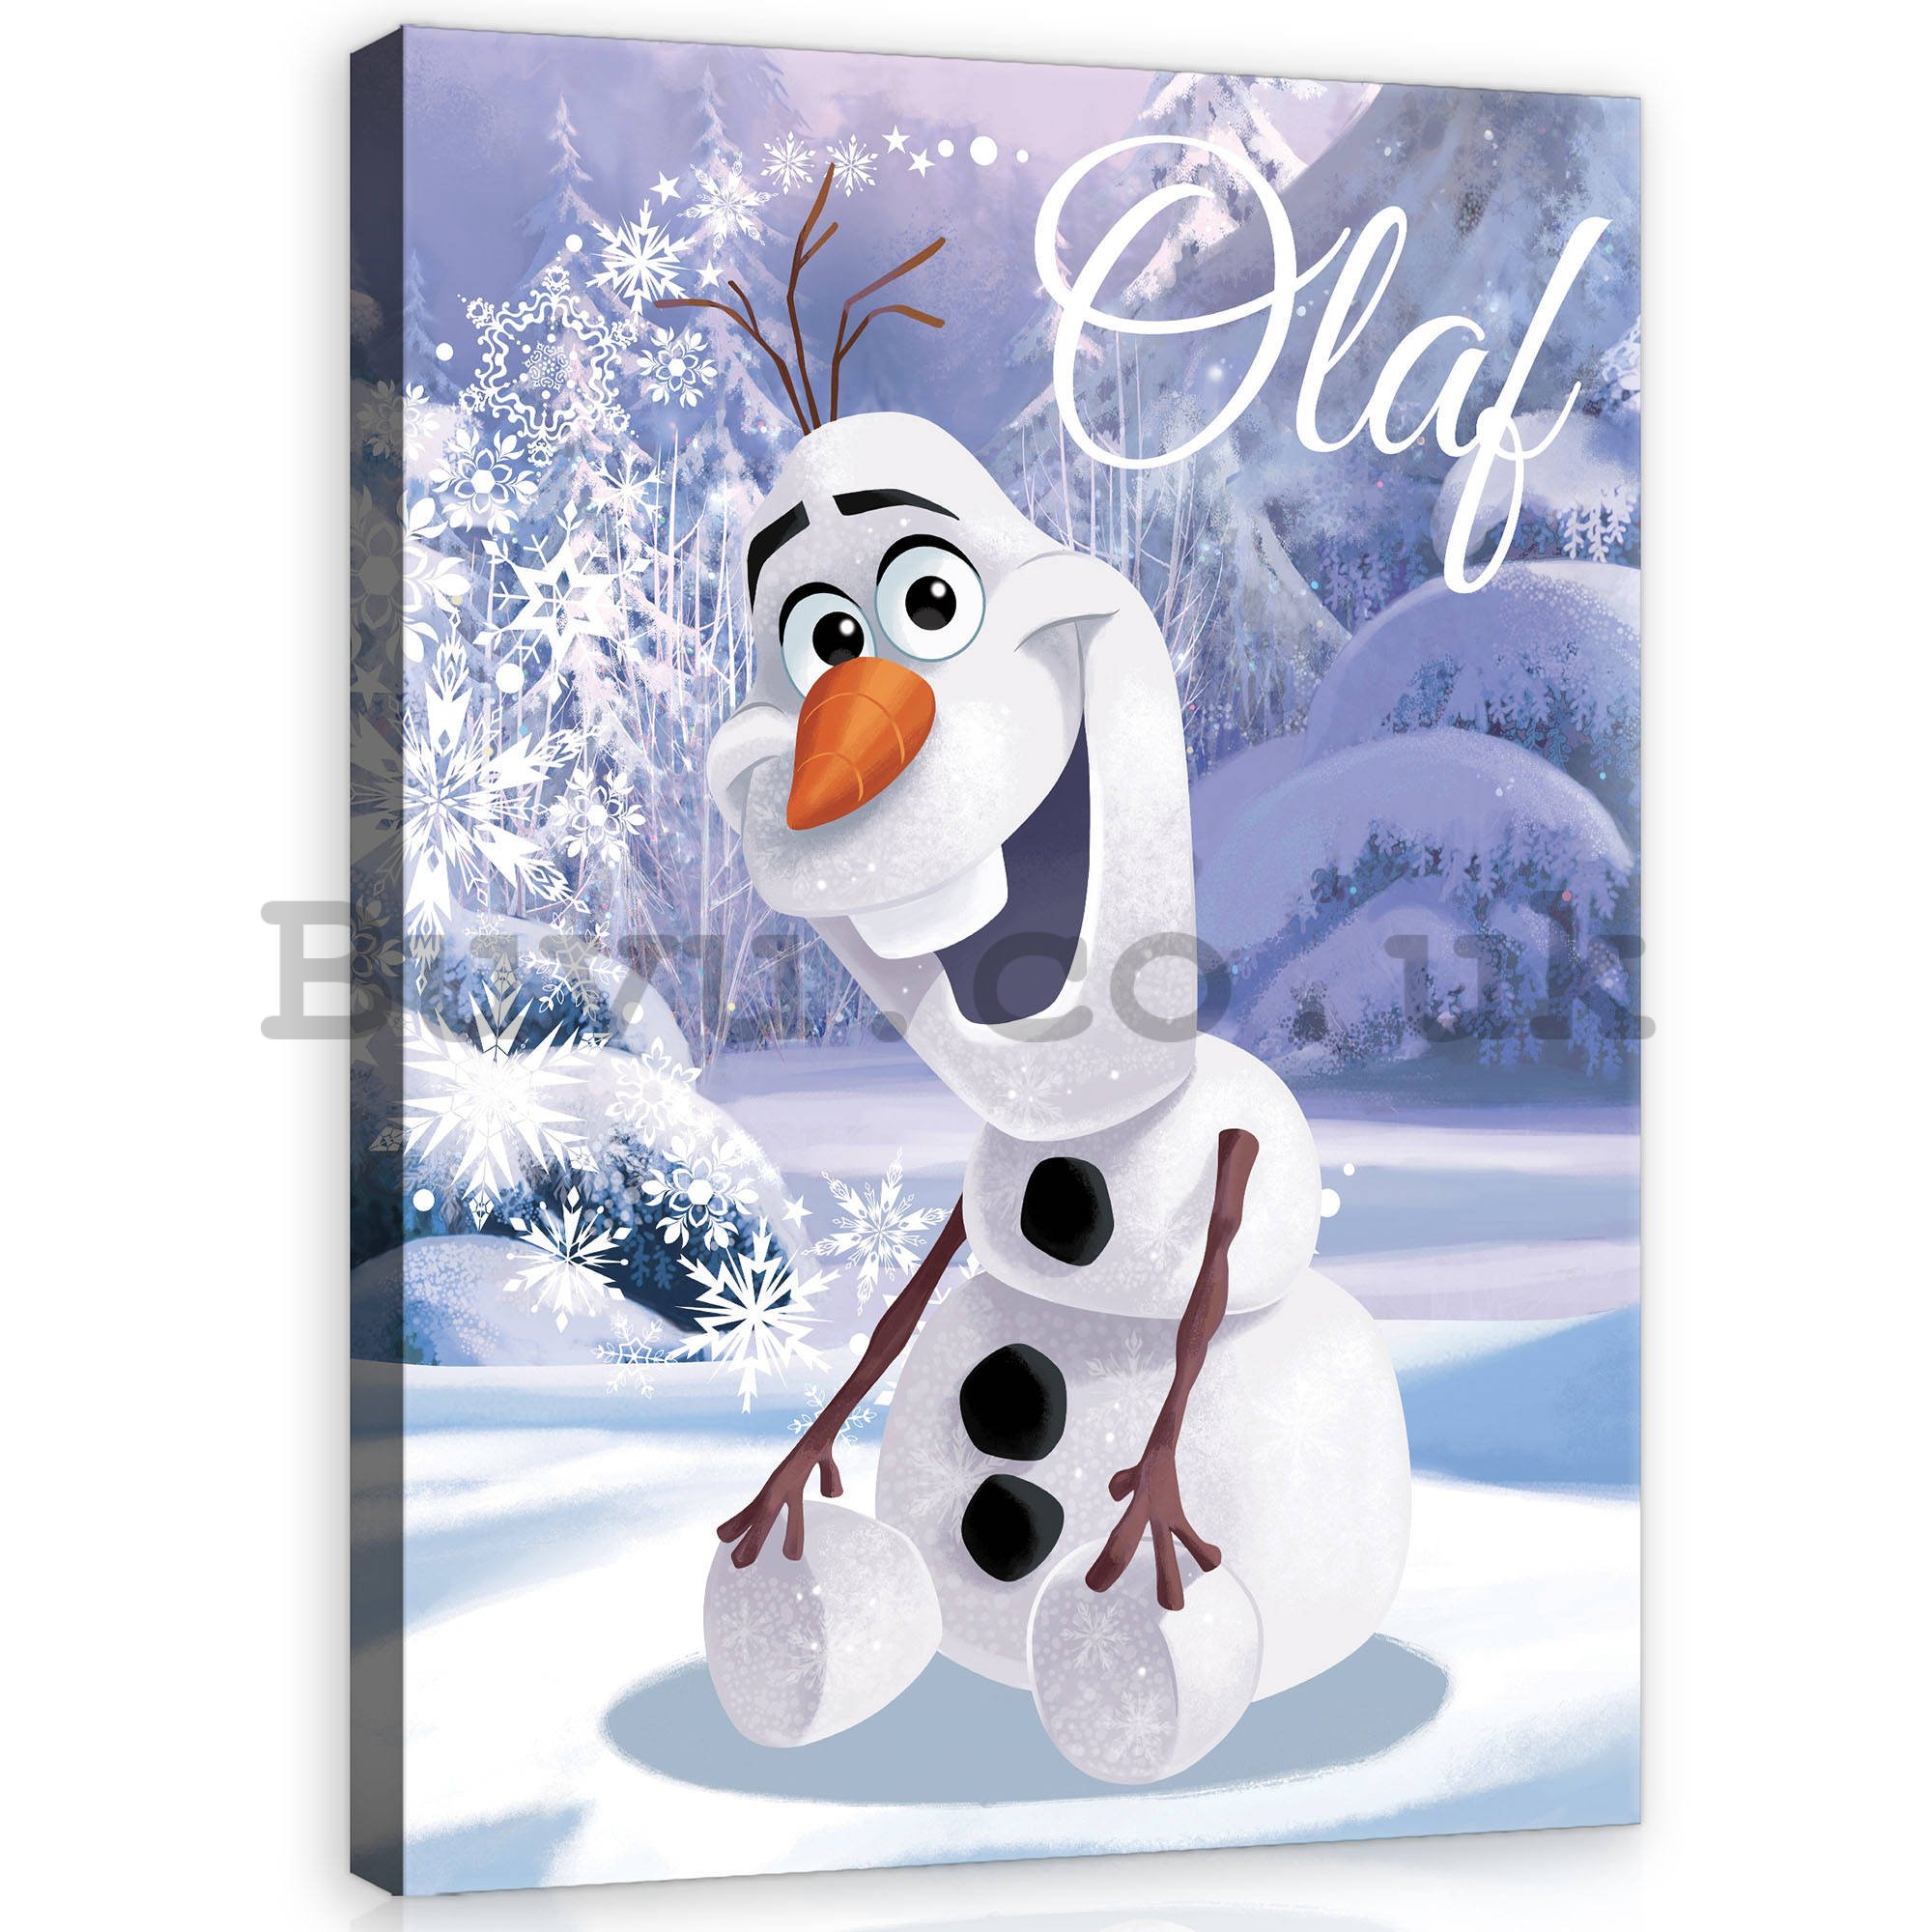 Painting on canvas: Frozen (Olaf) - 60x80 cm